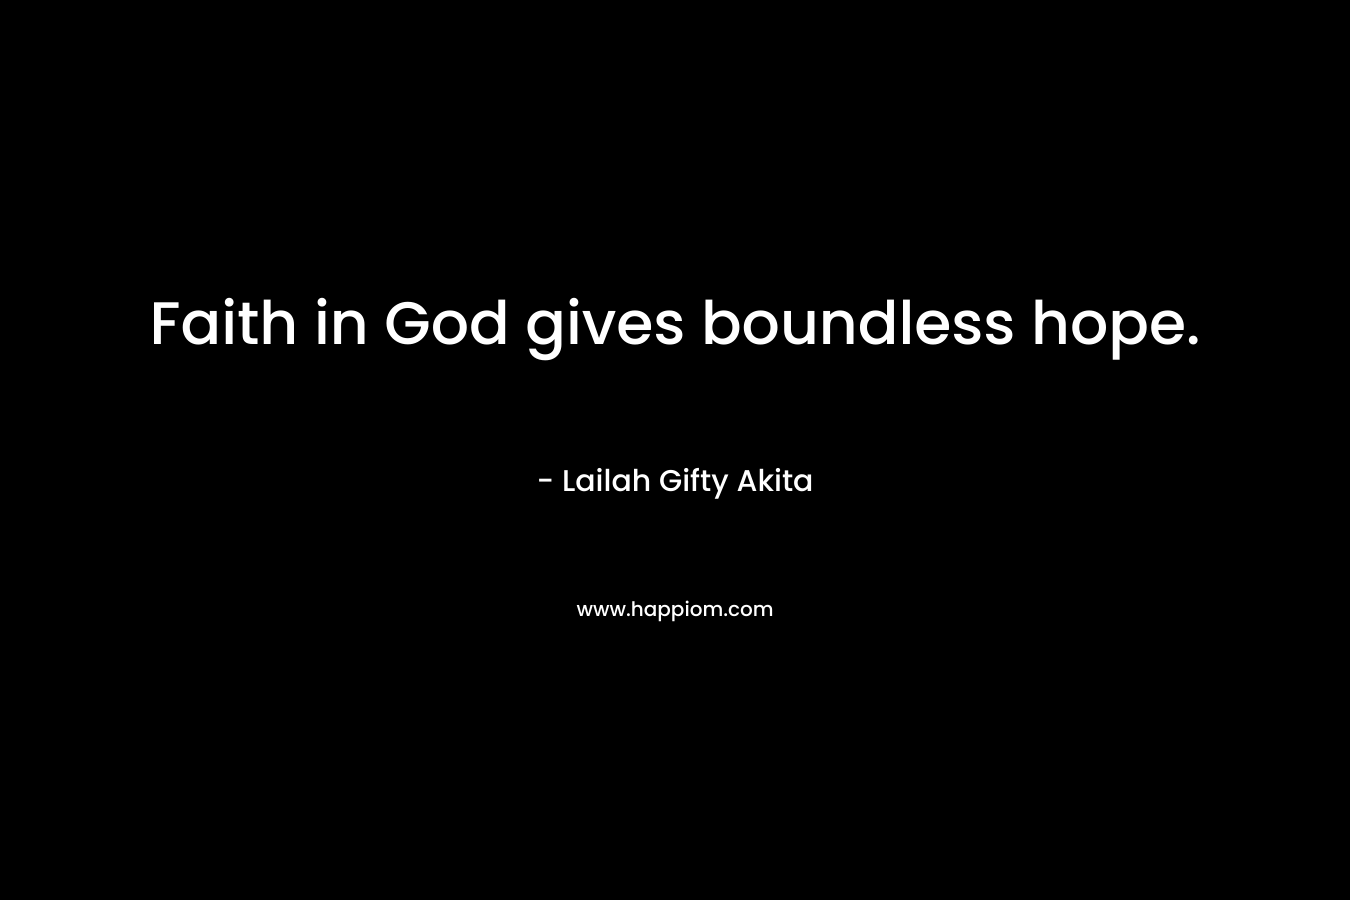 Faith in God gives boundless hope.